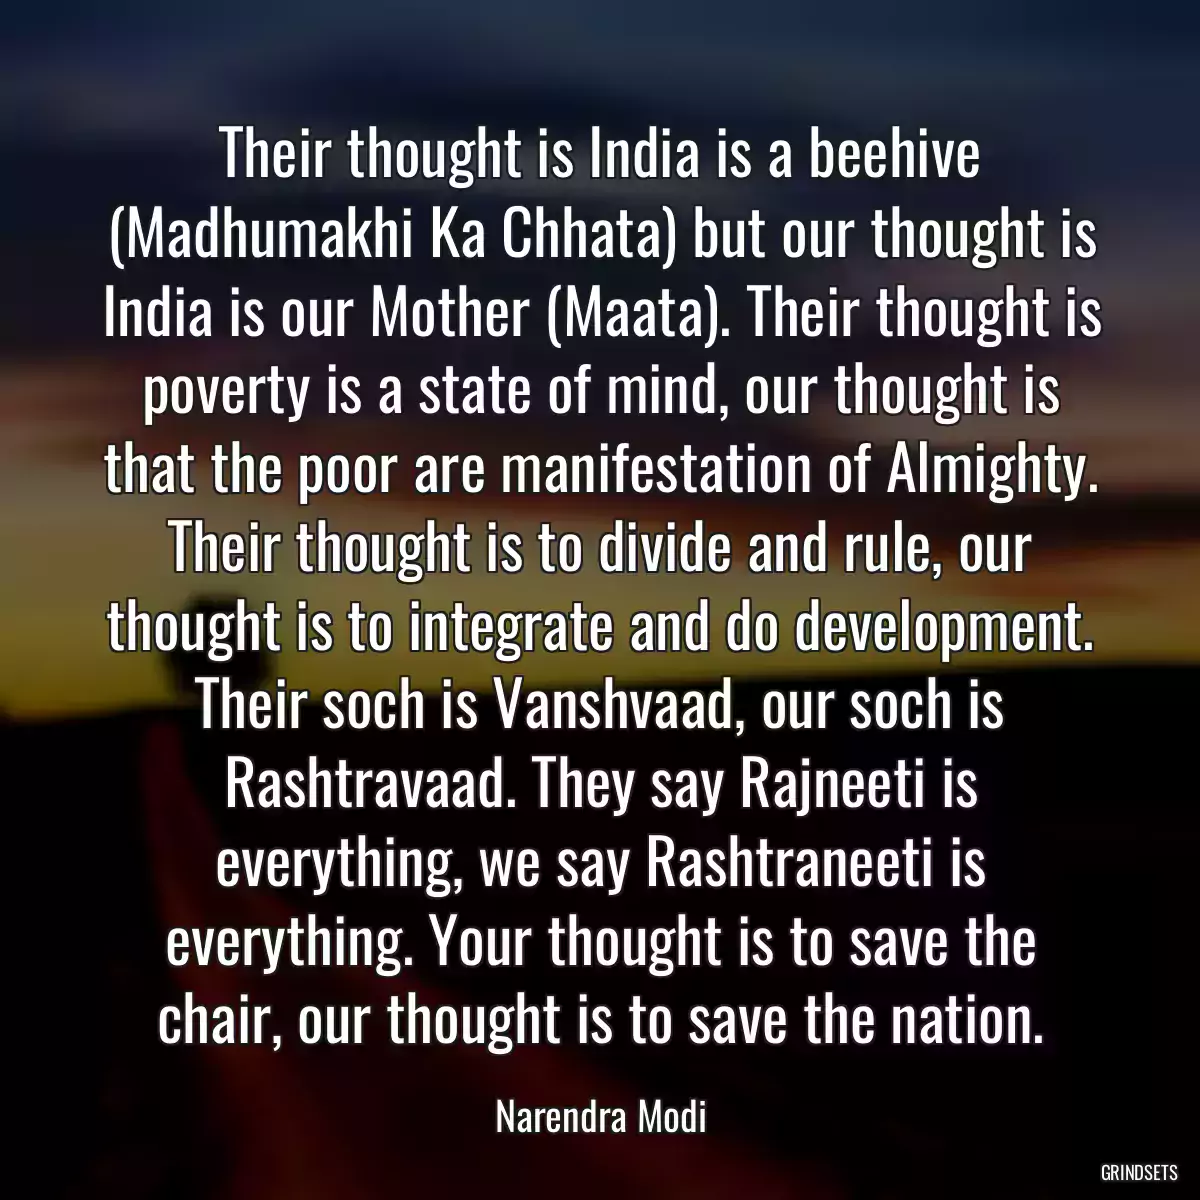 Their thought is India is a beehive (Madhumakhi Ka Chhata) but our thought is India is our Mother (Maata). Their thought is poverty is a state of mind, our thought is that the poor are manifestation of Almighty. Their thought is to divide and rule, our thought is to integrate and do development. Their soch is Vanshvaad, our soch is Rashtravaad. They say Rajneeti is everything, we say Rashtraneeti is everything. Your thought is to save the chair, our thought is to save the nation.